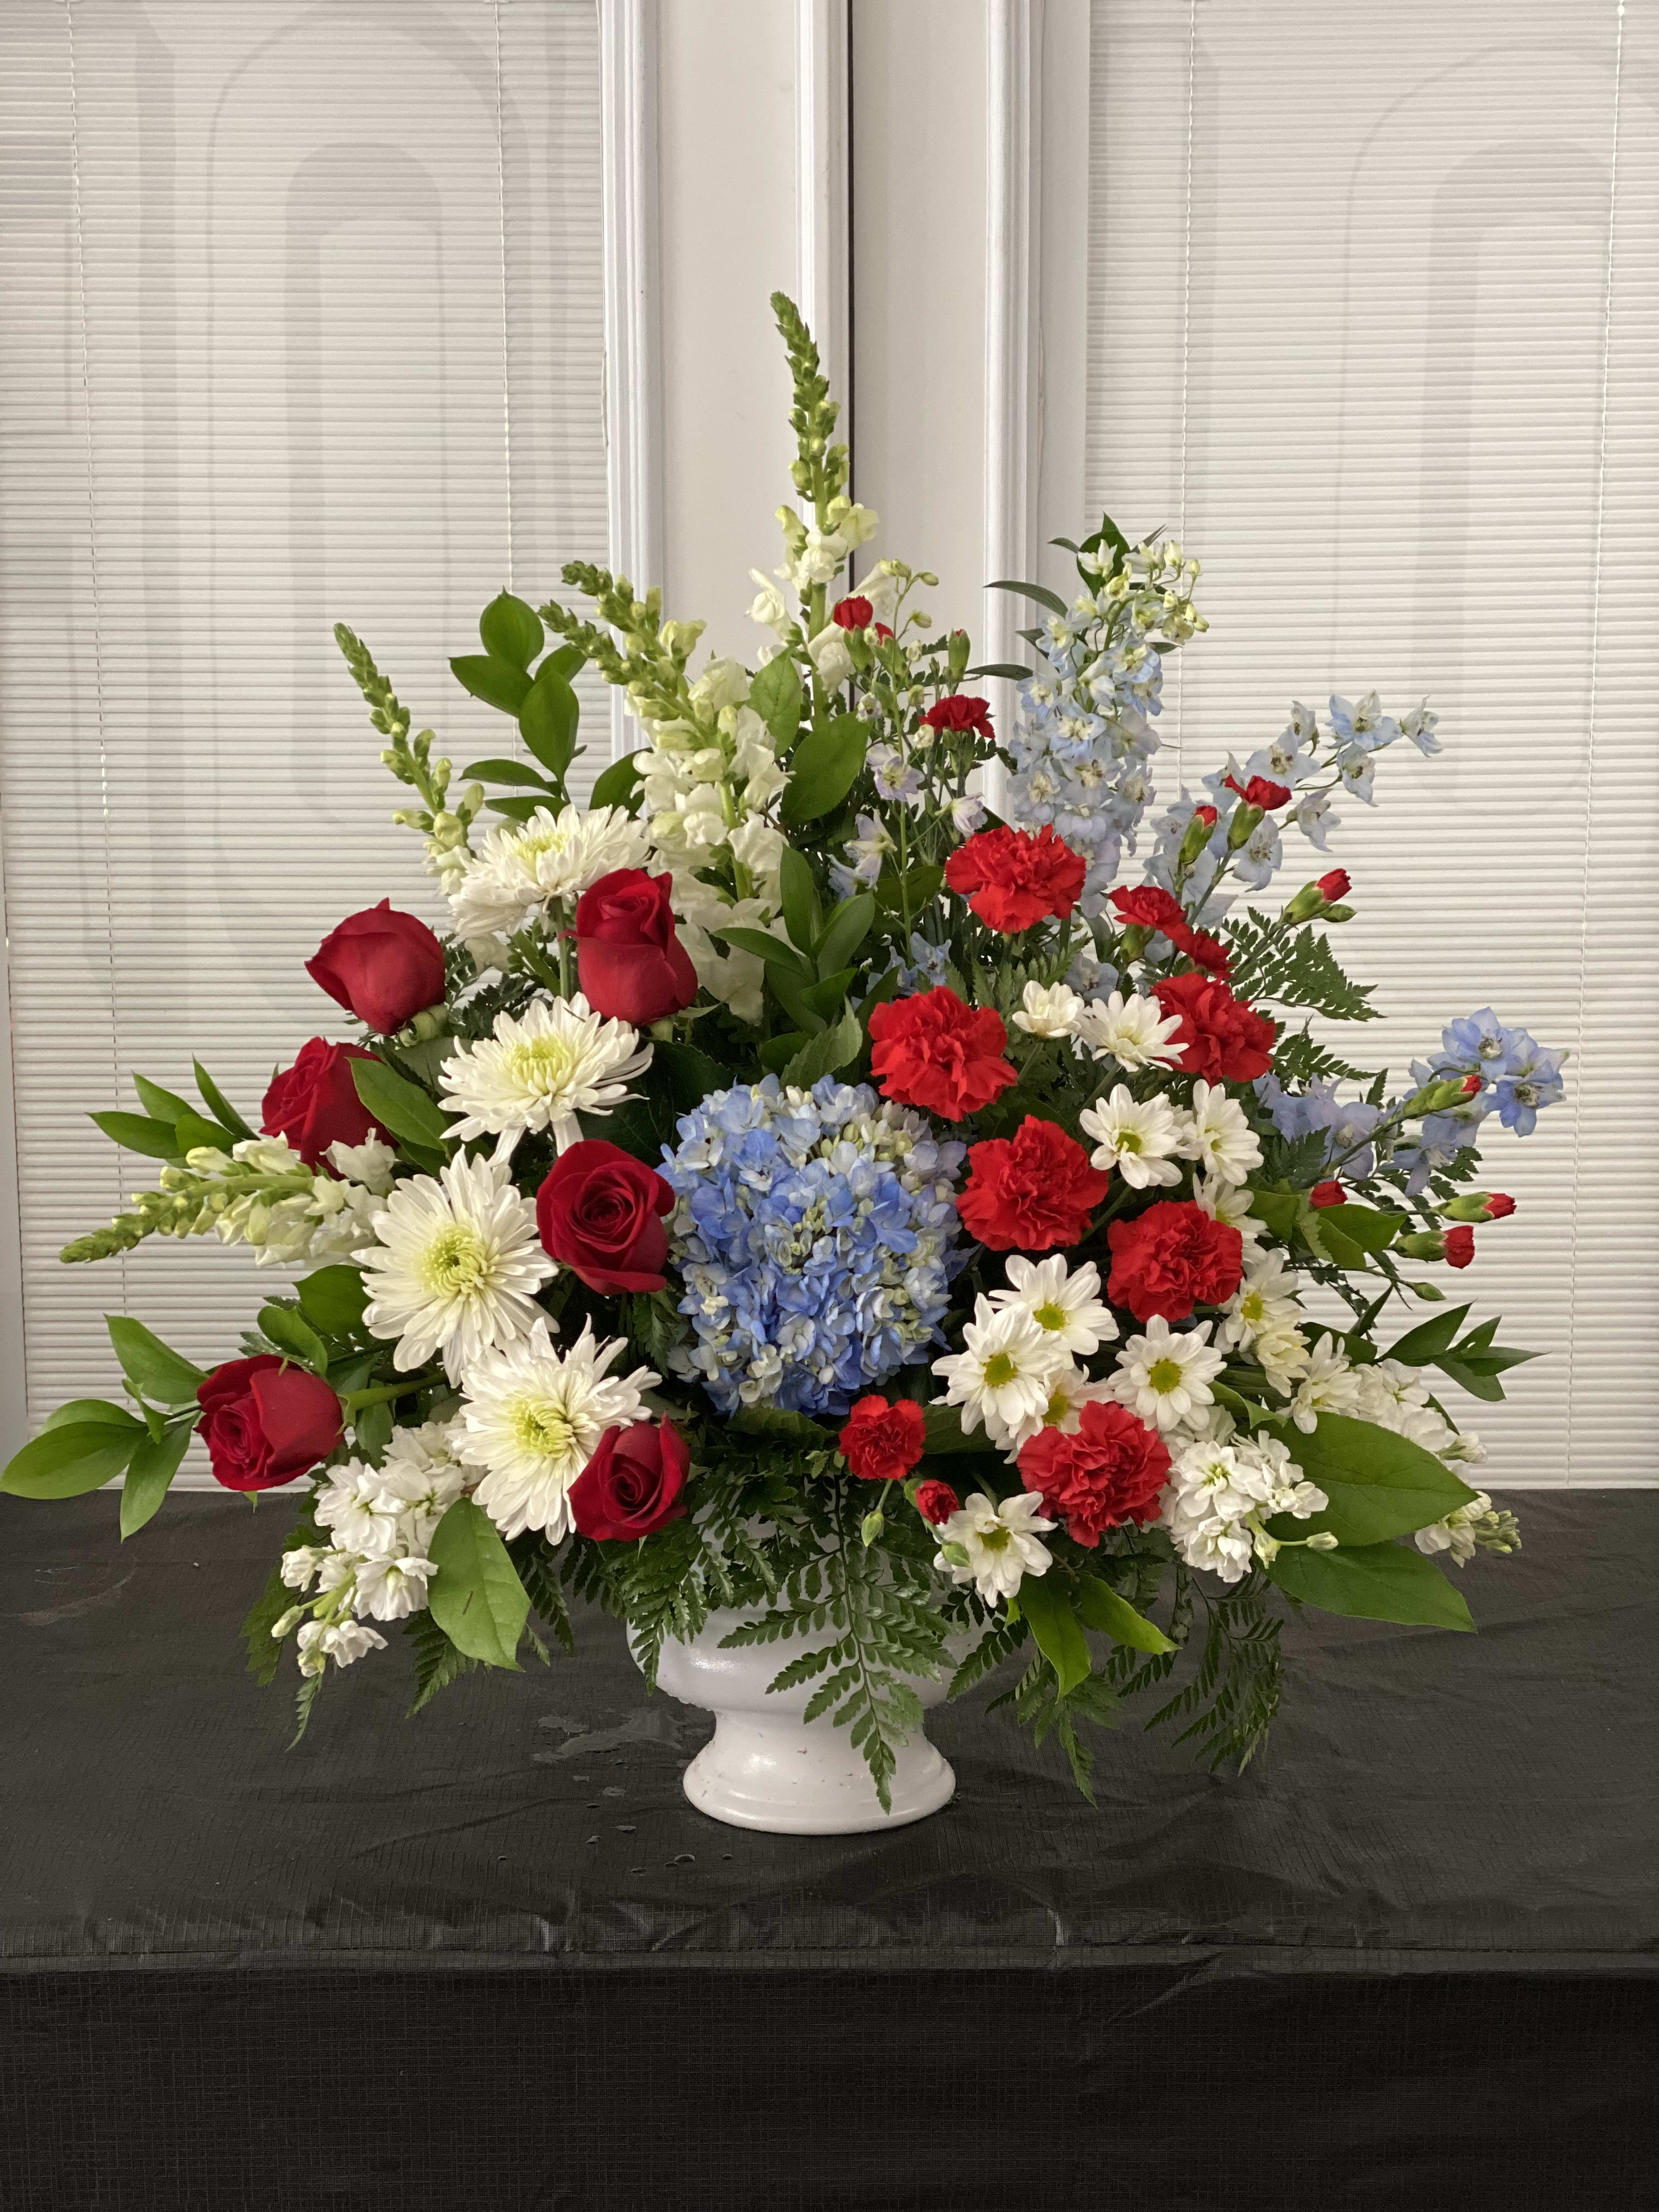 With Distinction - A dazzling display of patriotic red white and blue flowers sends a silent yet poignant statement about hope freedom and the strength to endure. This proud bouquet is a testament to life that is sure to be appreciated.